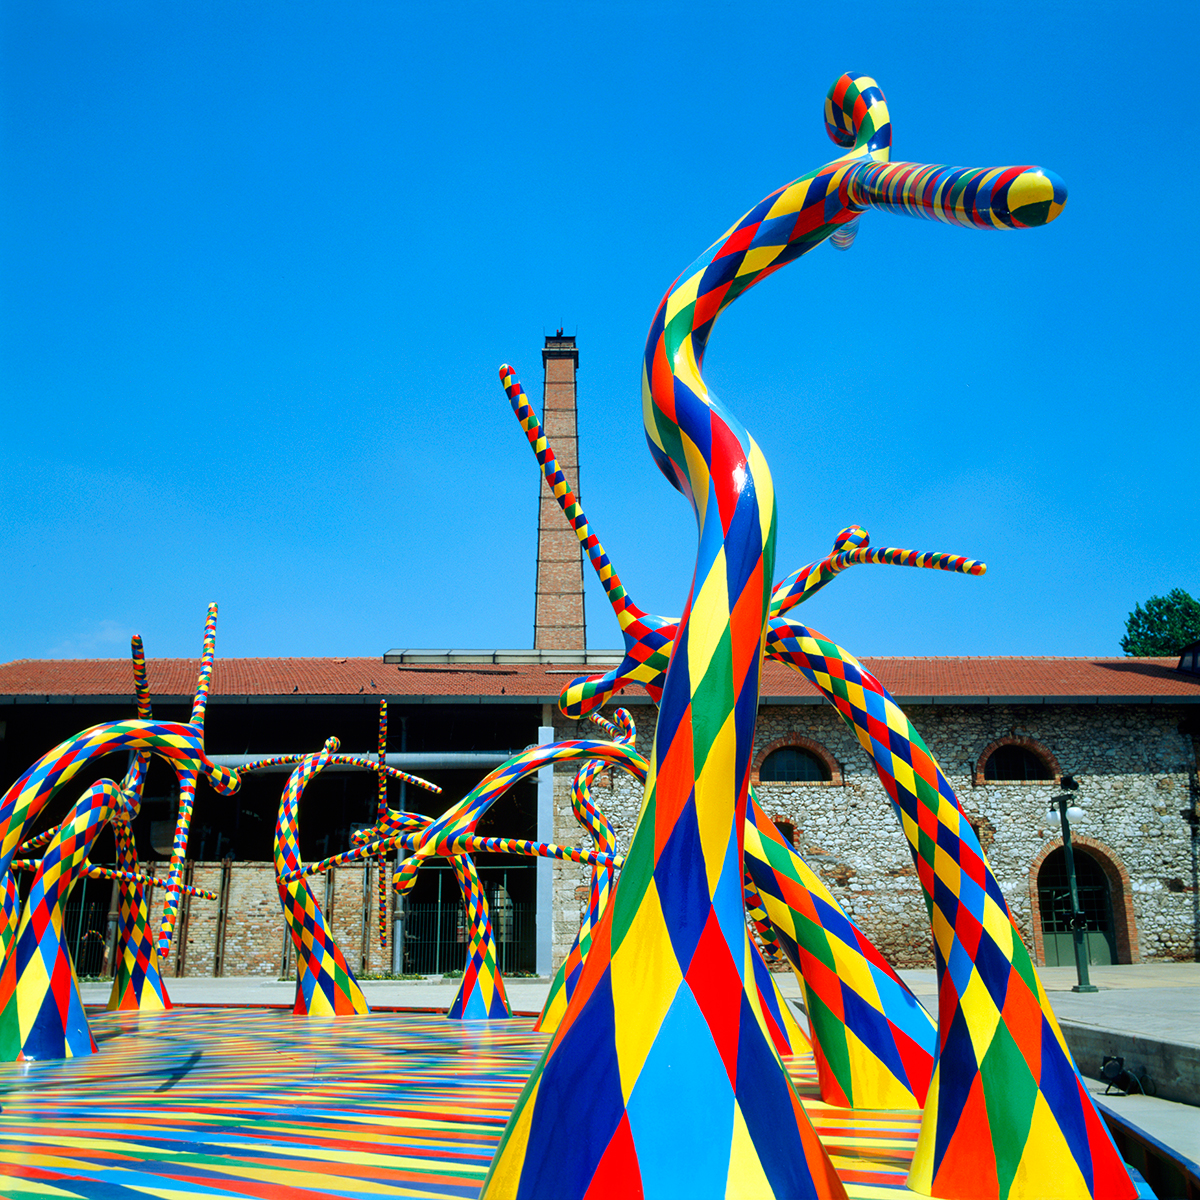 Vassiliki Sculpture,The City of Games